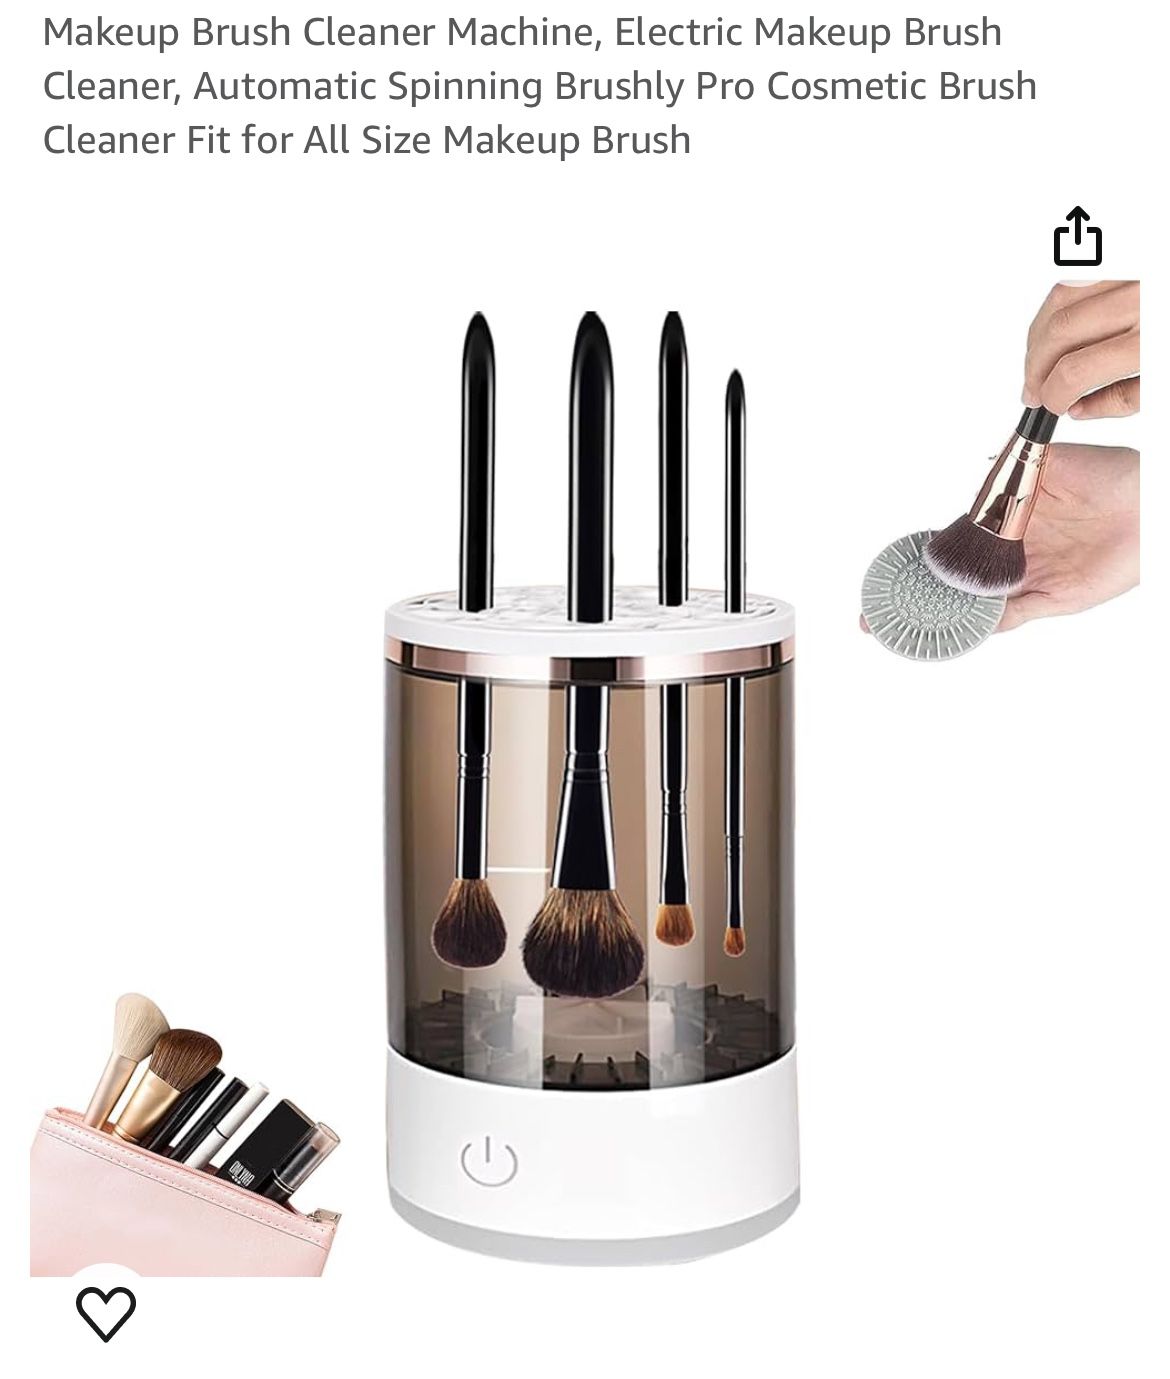 Makeup Brush Cleaner Machine, Electric Makeup Brush Cleaner, Automatic Spinning Brushly Pro Cosmetic Brush Cleaner Fit for All Size Makeup Brush